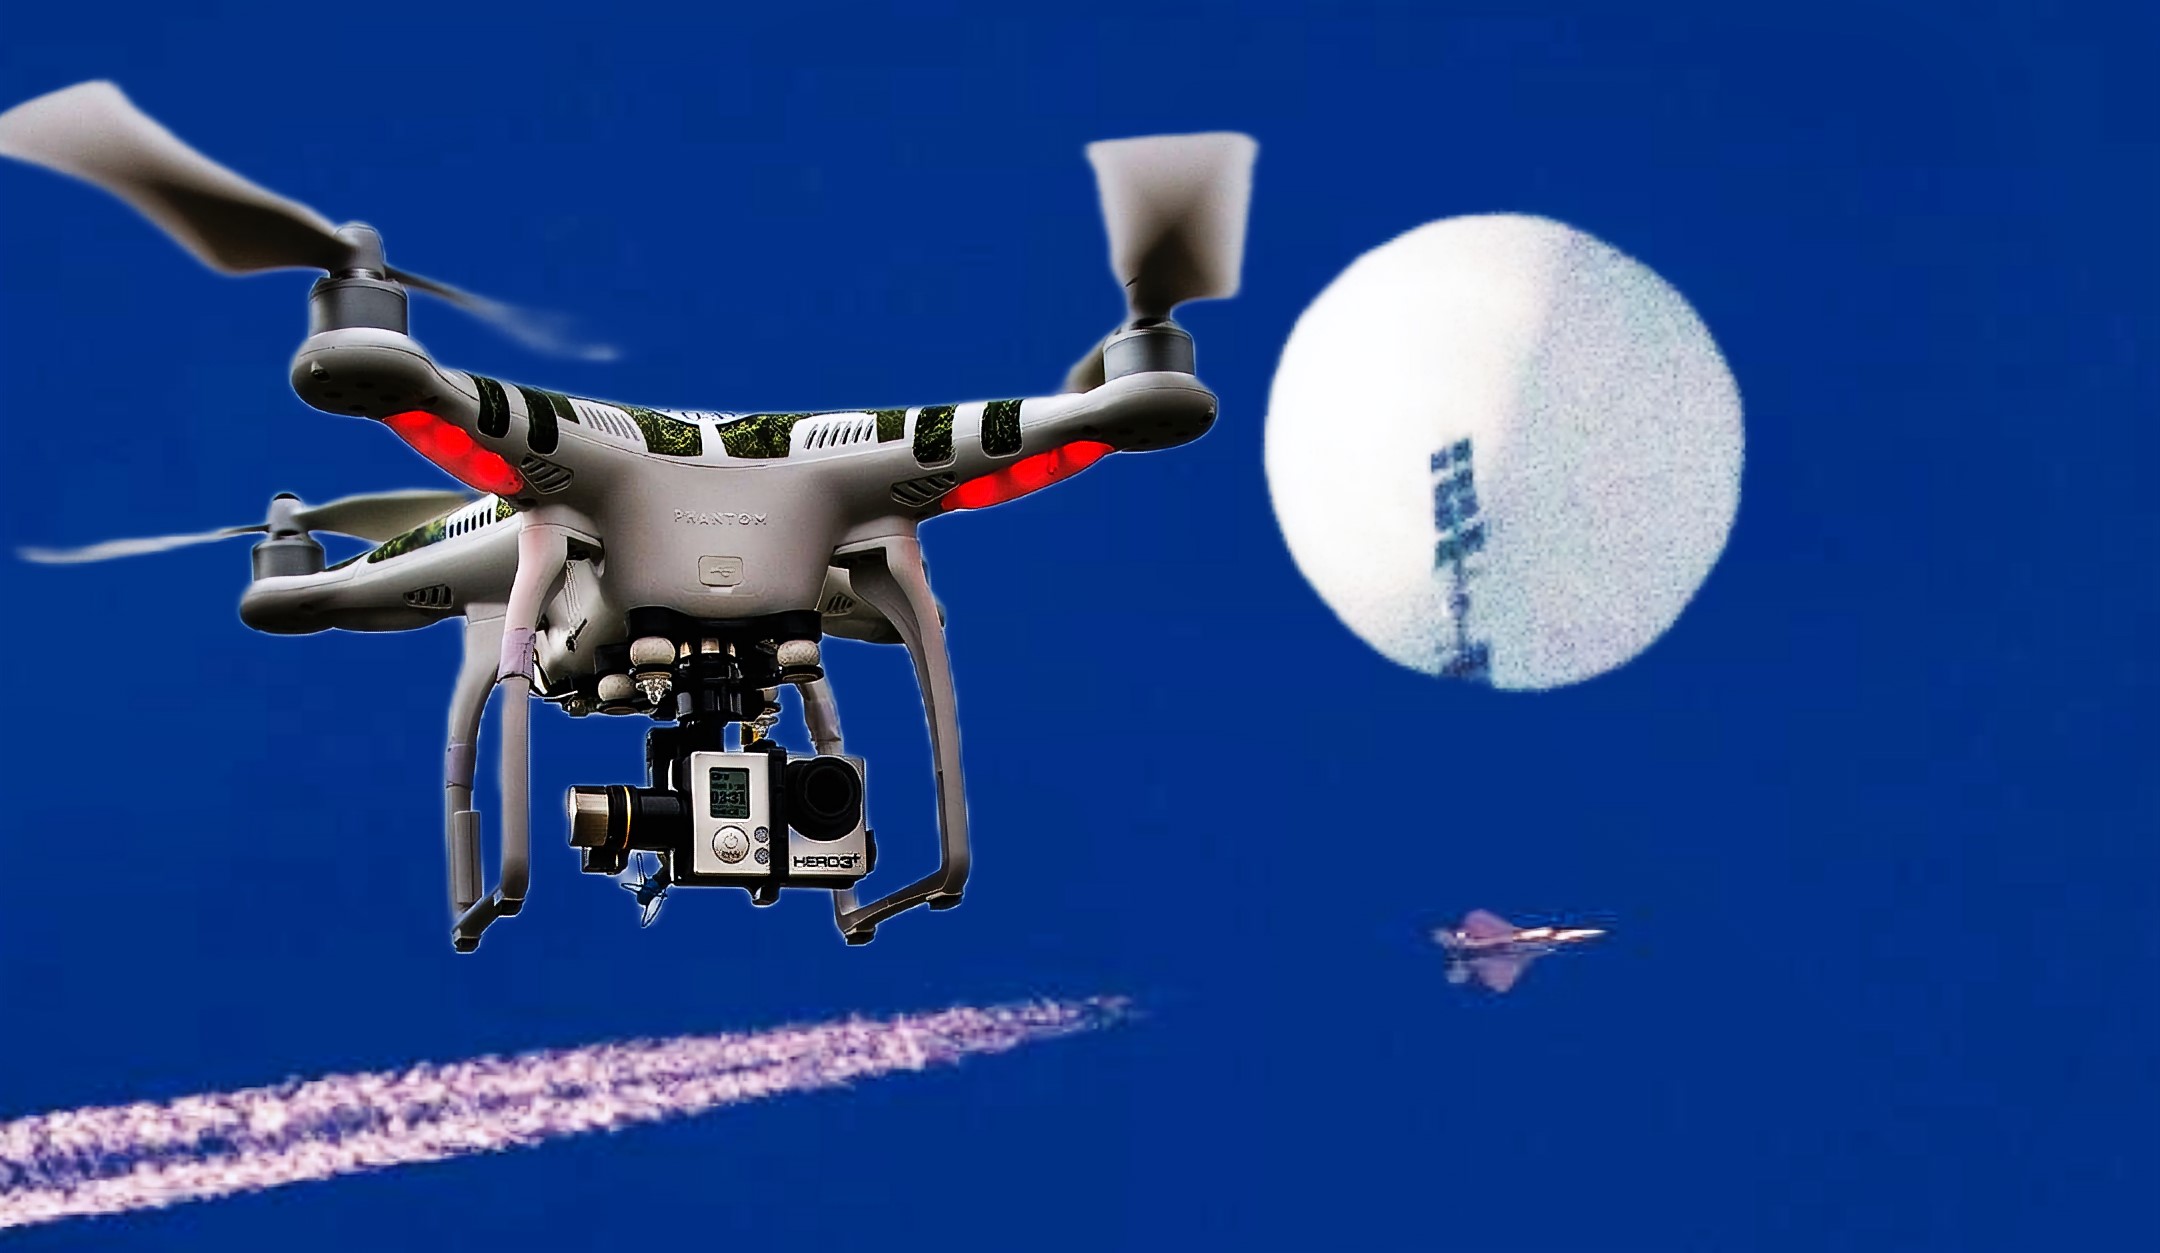 Photo edit for Chinese spy balloon and 2019-2020 Colorado drone. Credit: Alexander J. Williams III/Popacta